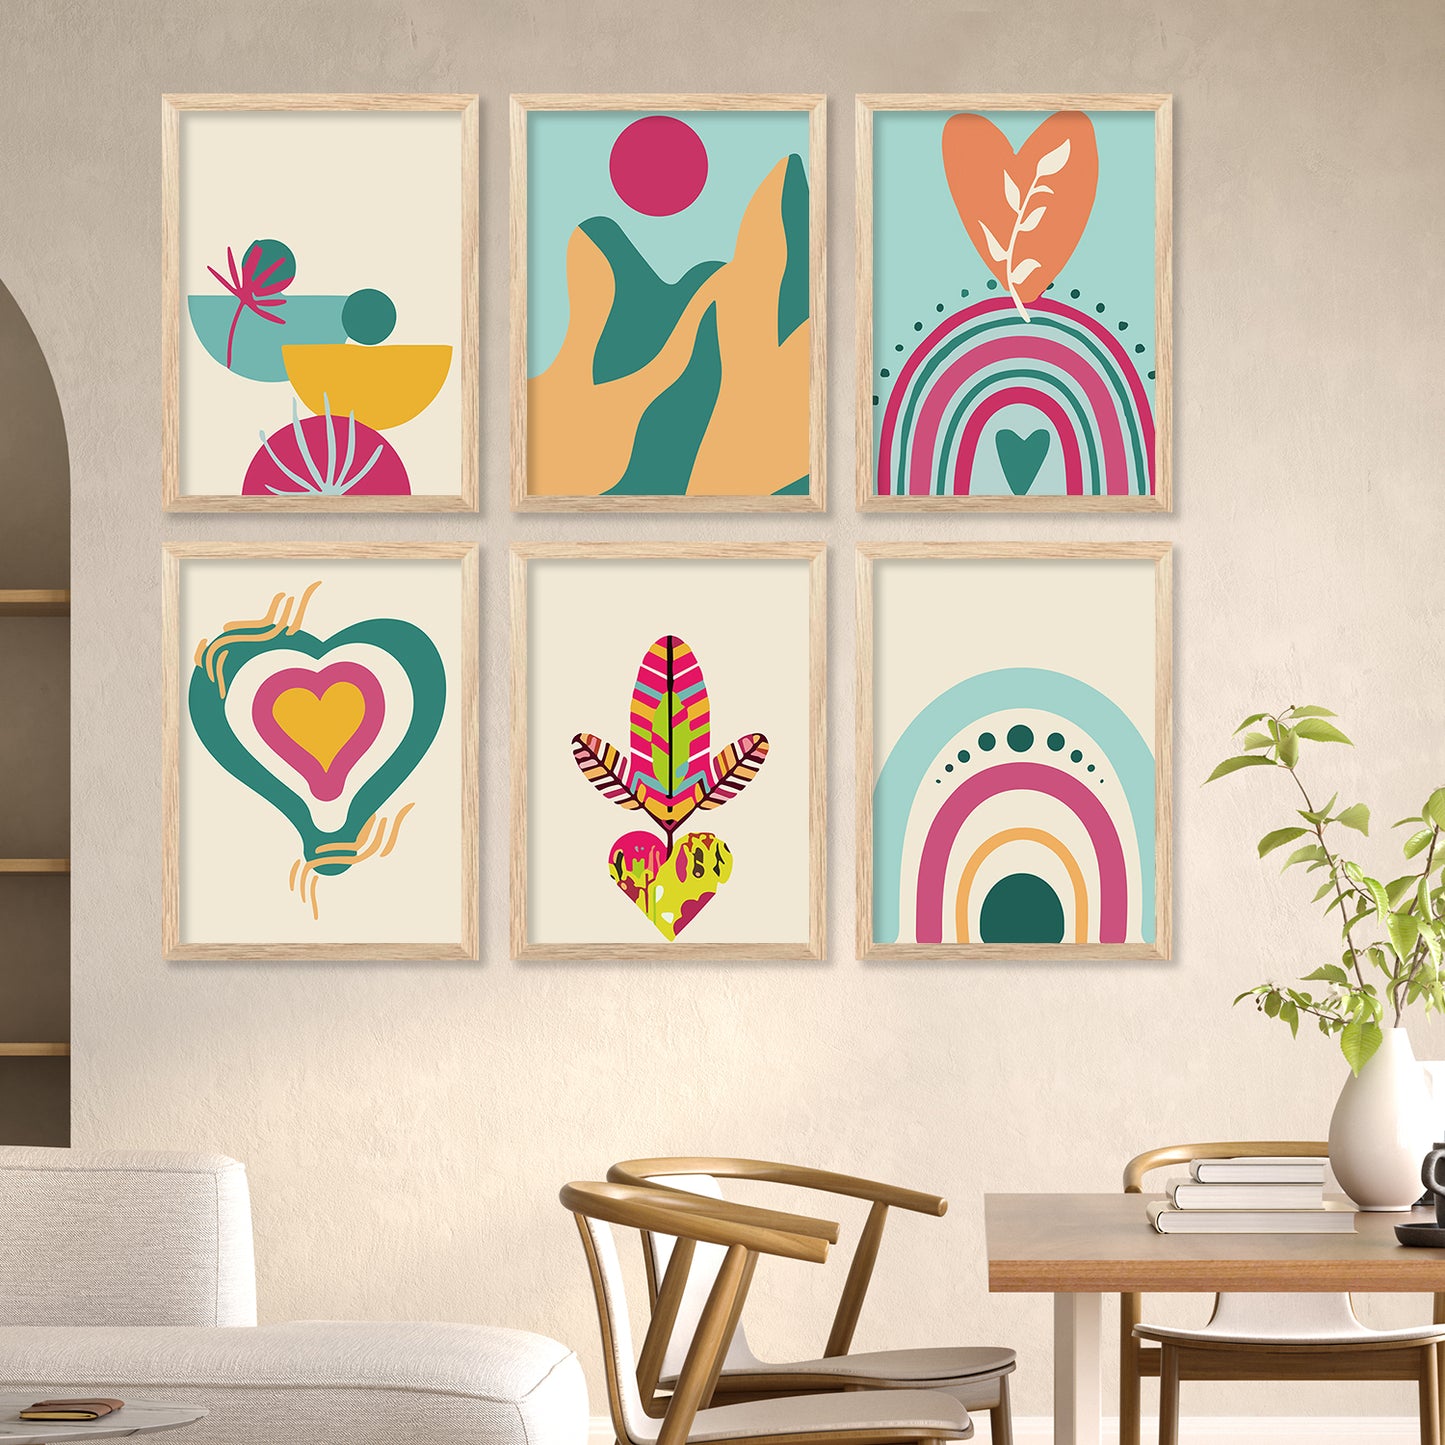 Minimal Boho Art Framed Posters for Home Living Room Bedroom and Office Wall Decor Set of 6